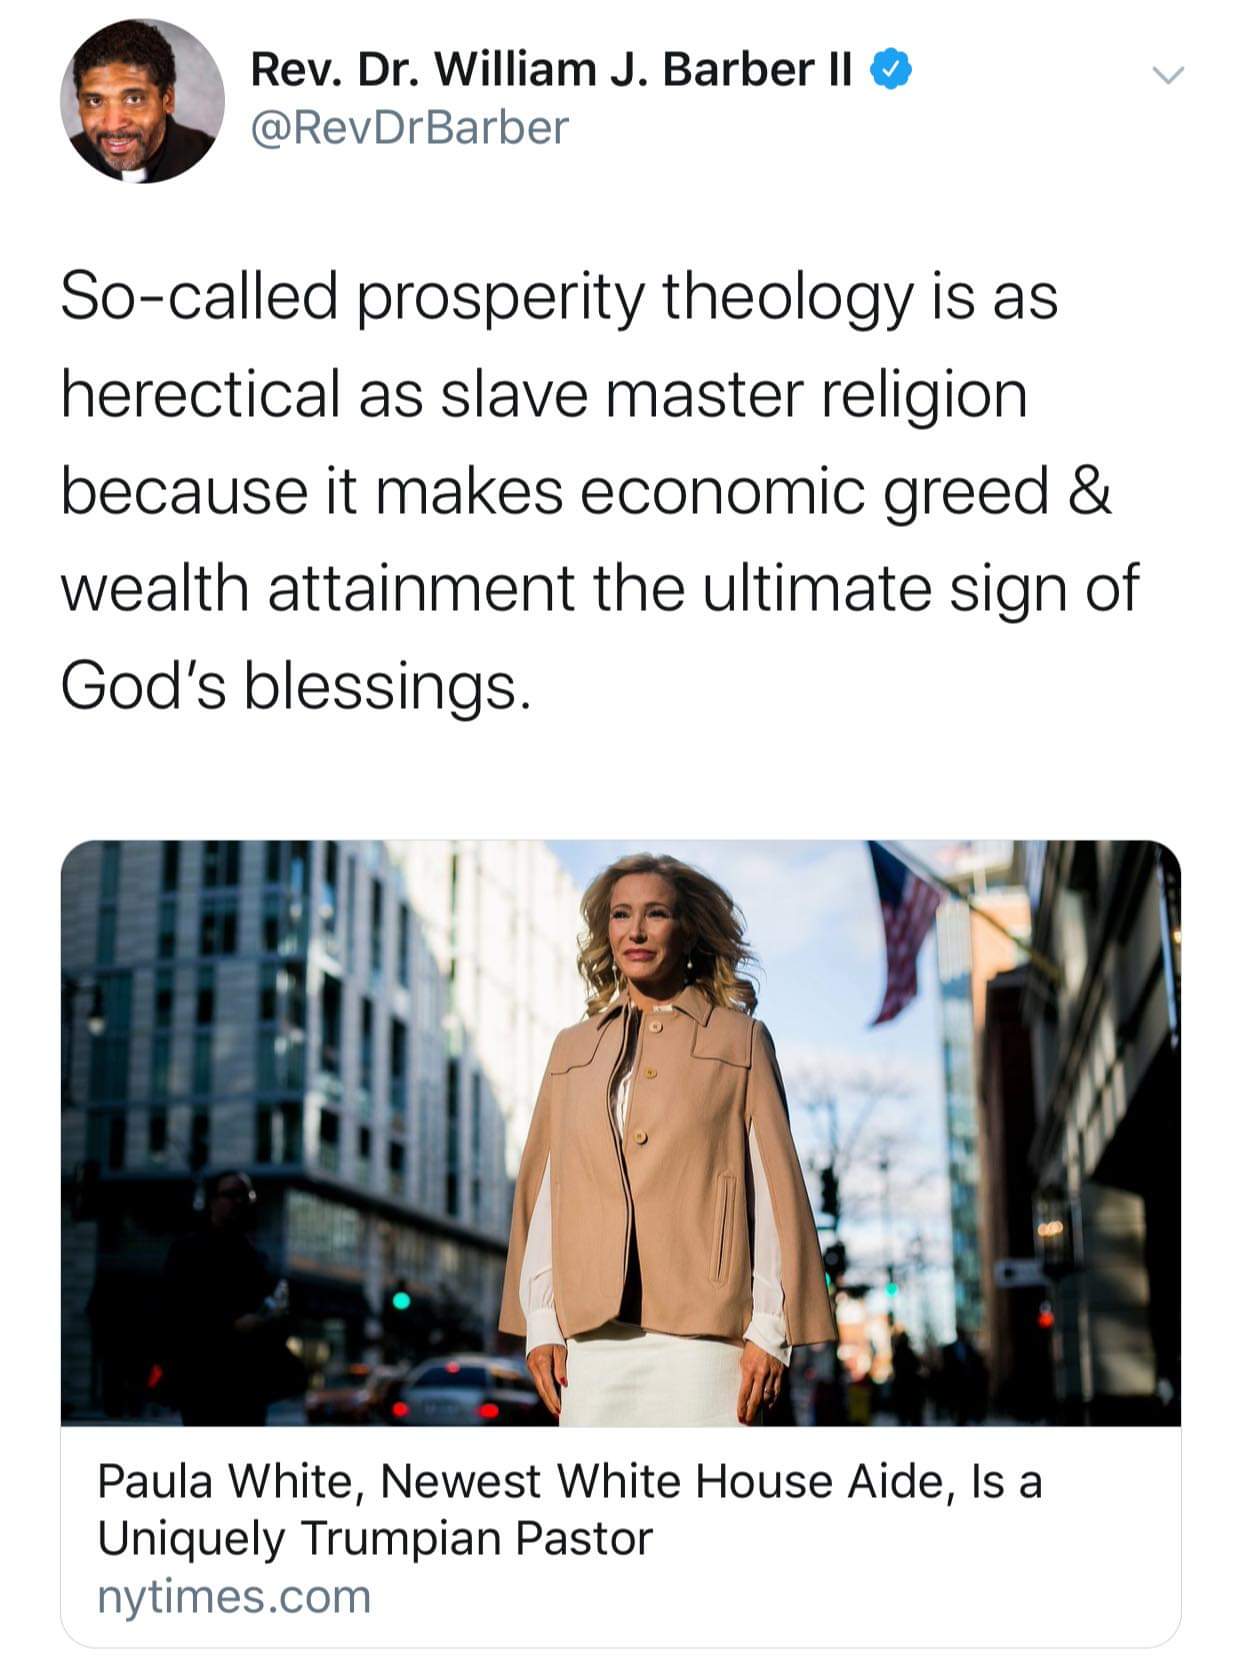 christian christian-memes christian text: Rev. Dr. William J. Barber Il @RevDrBarber So-called prosperity theology is as herectical as slave master religion because it makes economic greed & wealth attainment the ultimate sign of God's blessings. Paula White, Newest White House Aide, Is a Uniquely Trumpian Pastor nytimes.com 